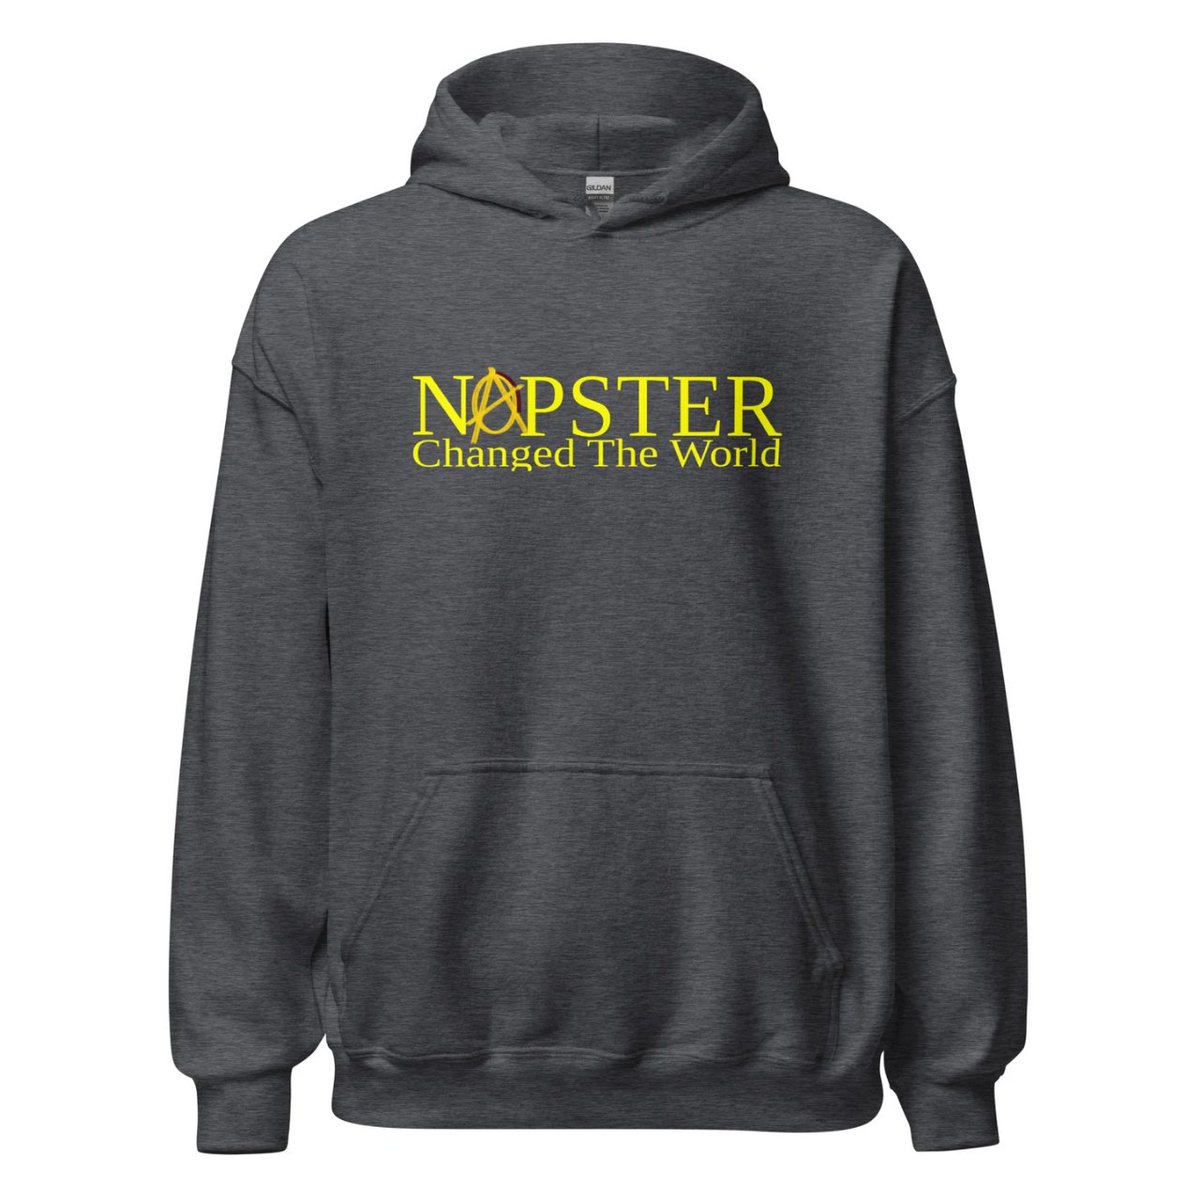 Show your support for the revolutionary music-sharing platform with the Napster Changed The World hoodie from Anarchy Wear. Get it now and make your voice heard! #MusicRevolution #Napster #AnarchyWear

anarchywear.ca/collections/na…